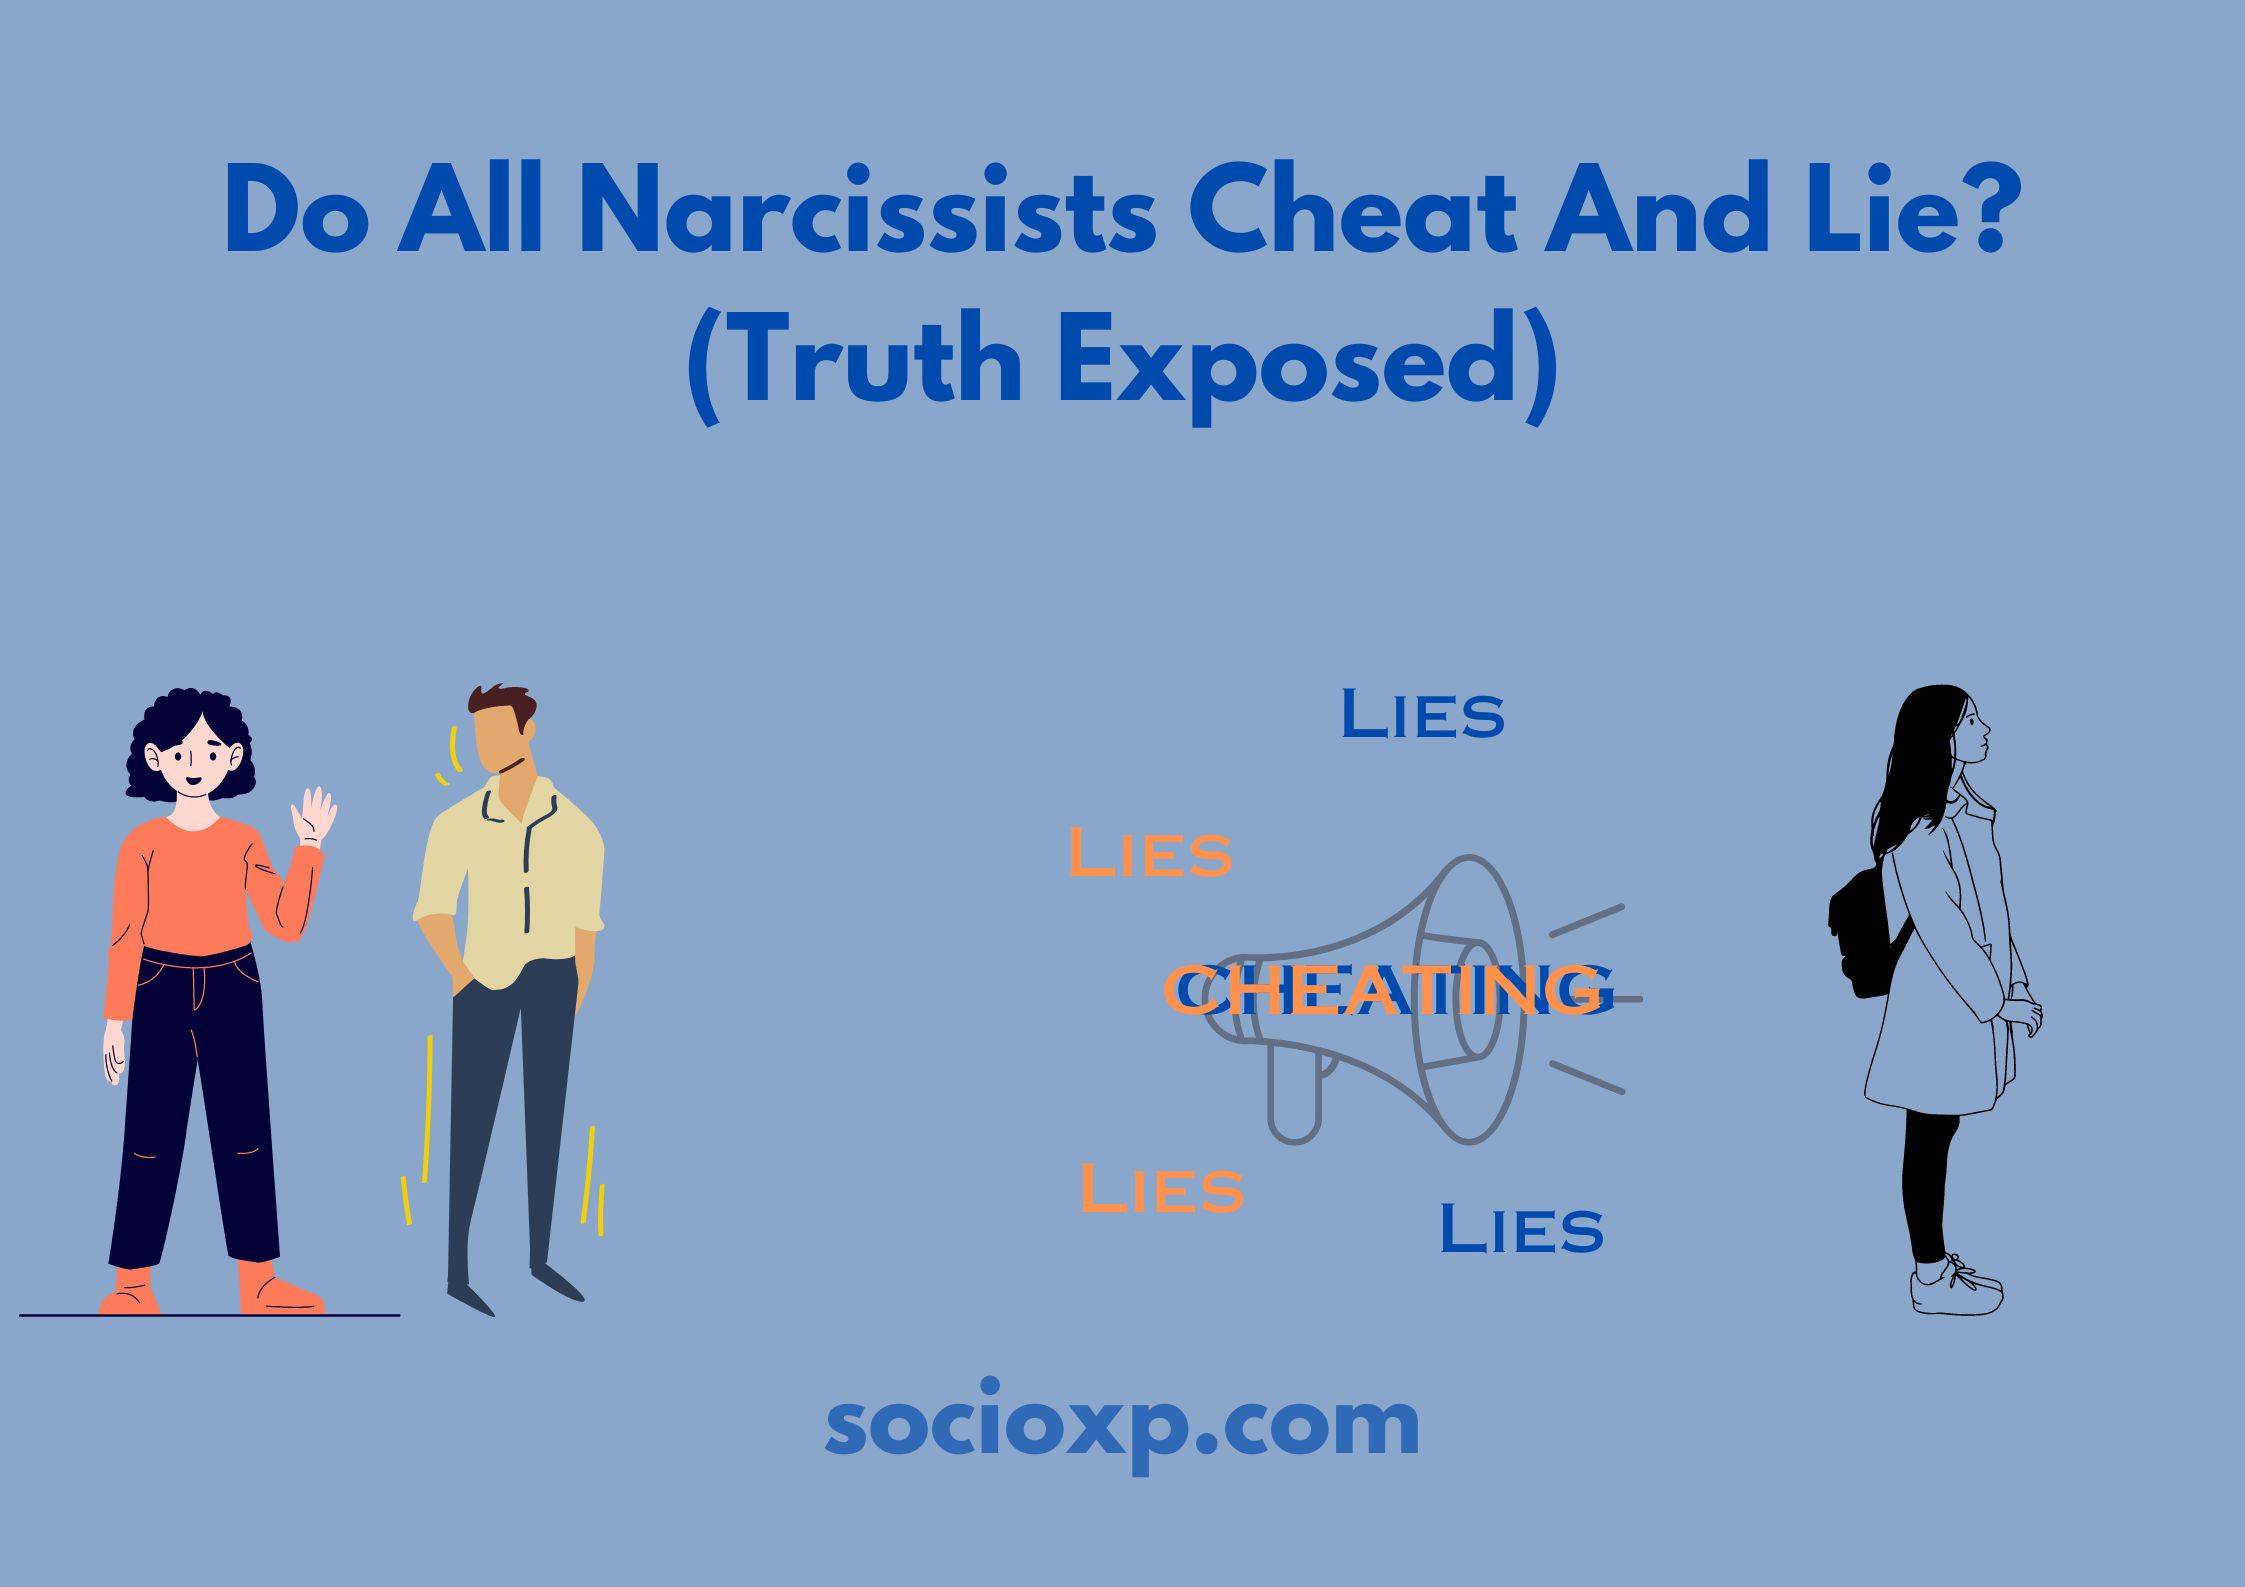 Do All Narcissists Cheat And Lie? (Truth Exposed)